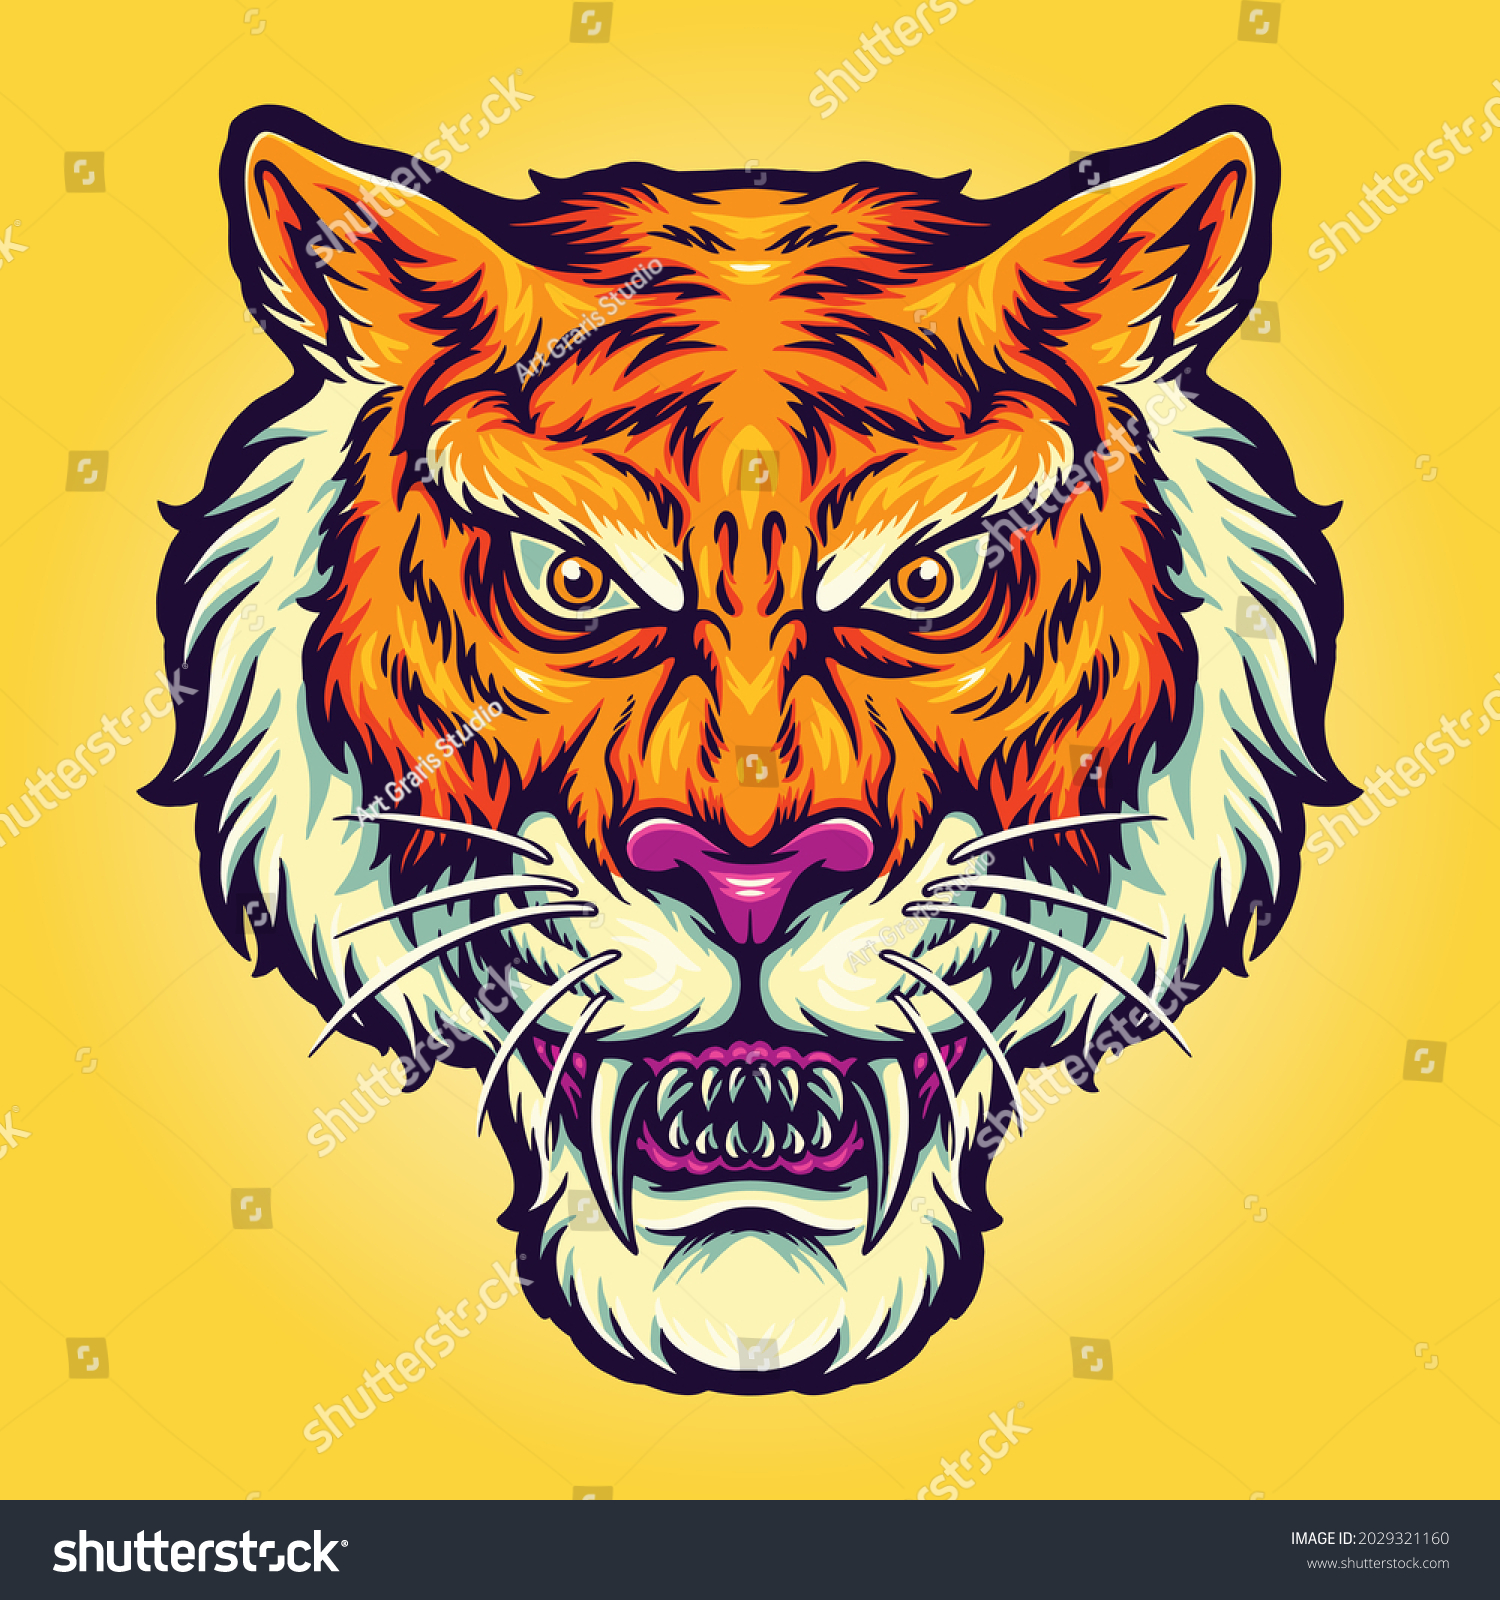 SVG of Angry Tiger Head Vector illustrations for your work Logo, mascot merchandise t-shirt, stickers and Label designs, poster, greeting cards advertising business company or brands. svg